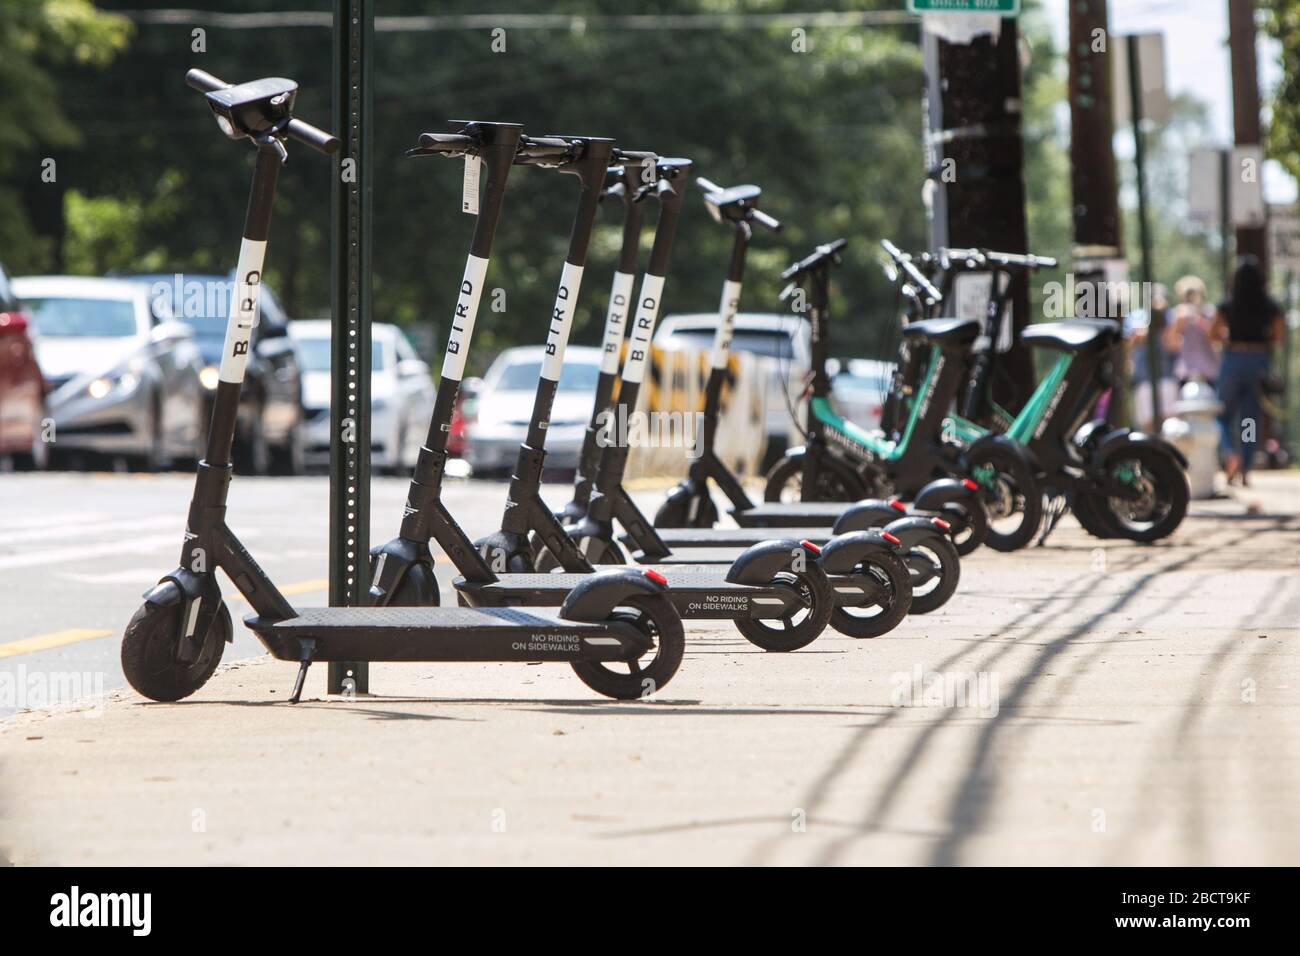 Several motorized scooters for rent sit lined up and parked on a sidewalk  at Piedmont Park on August 10, 2019 in Atlanta, GA. Stock Photo